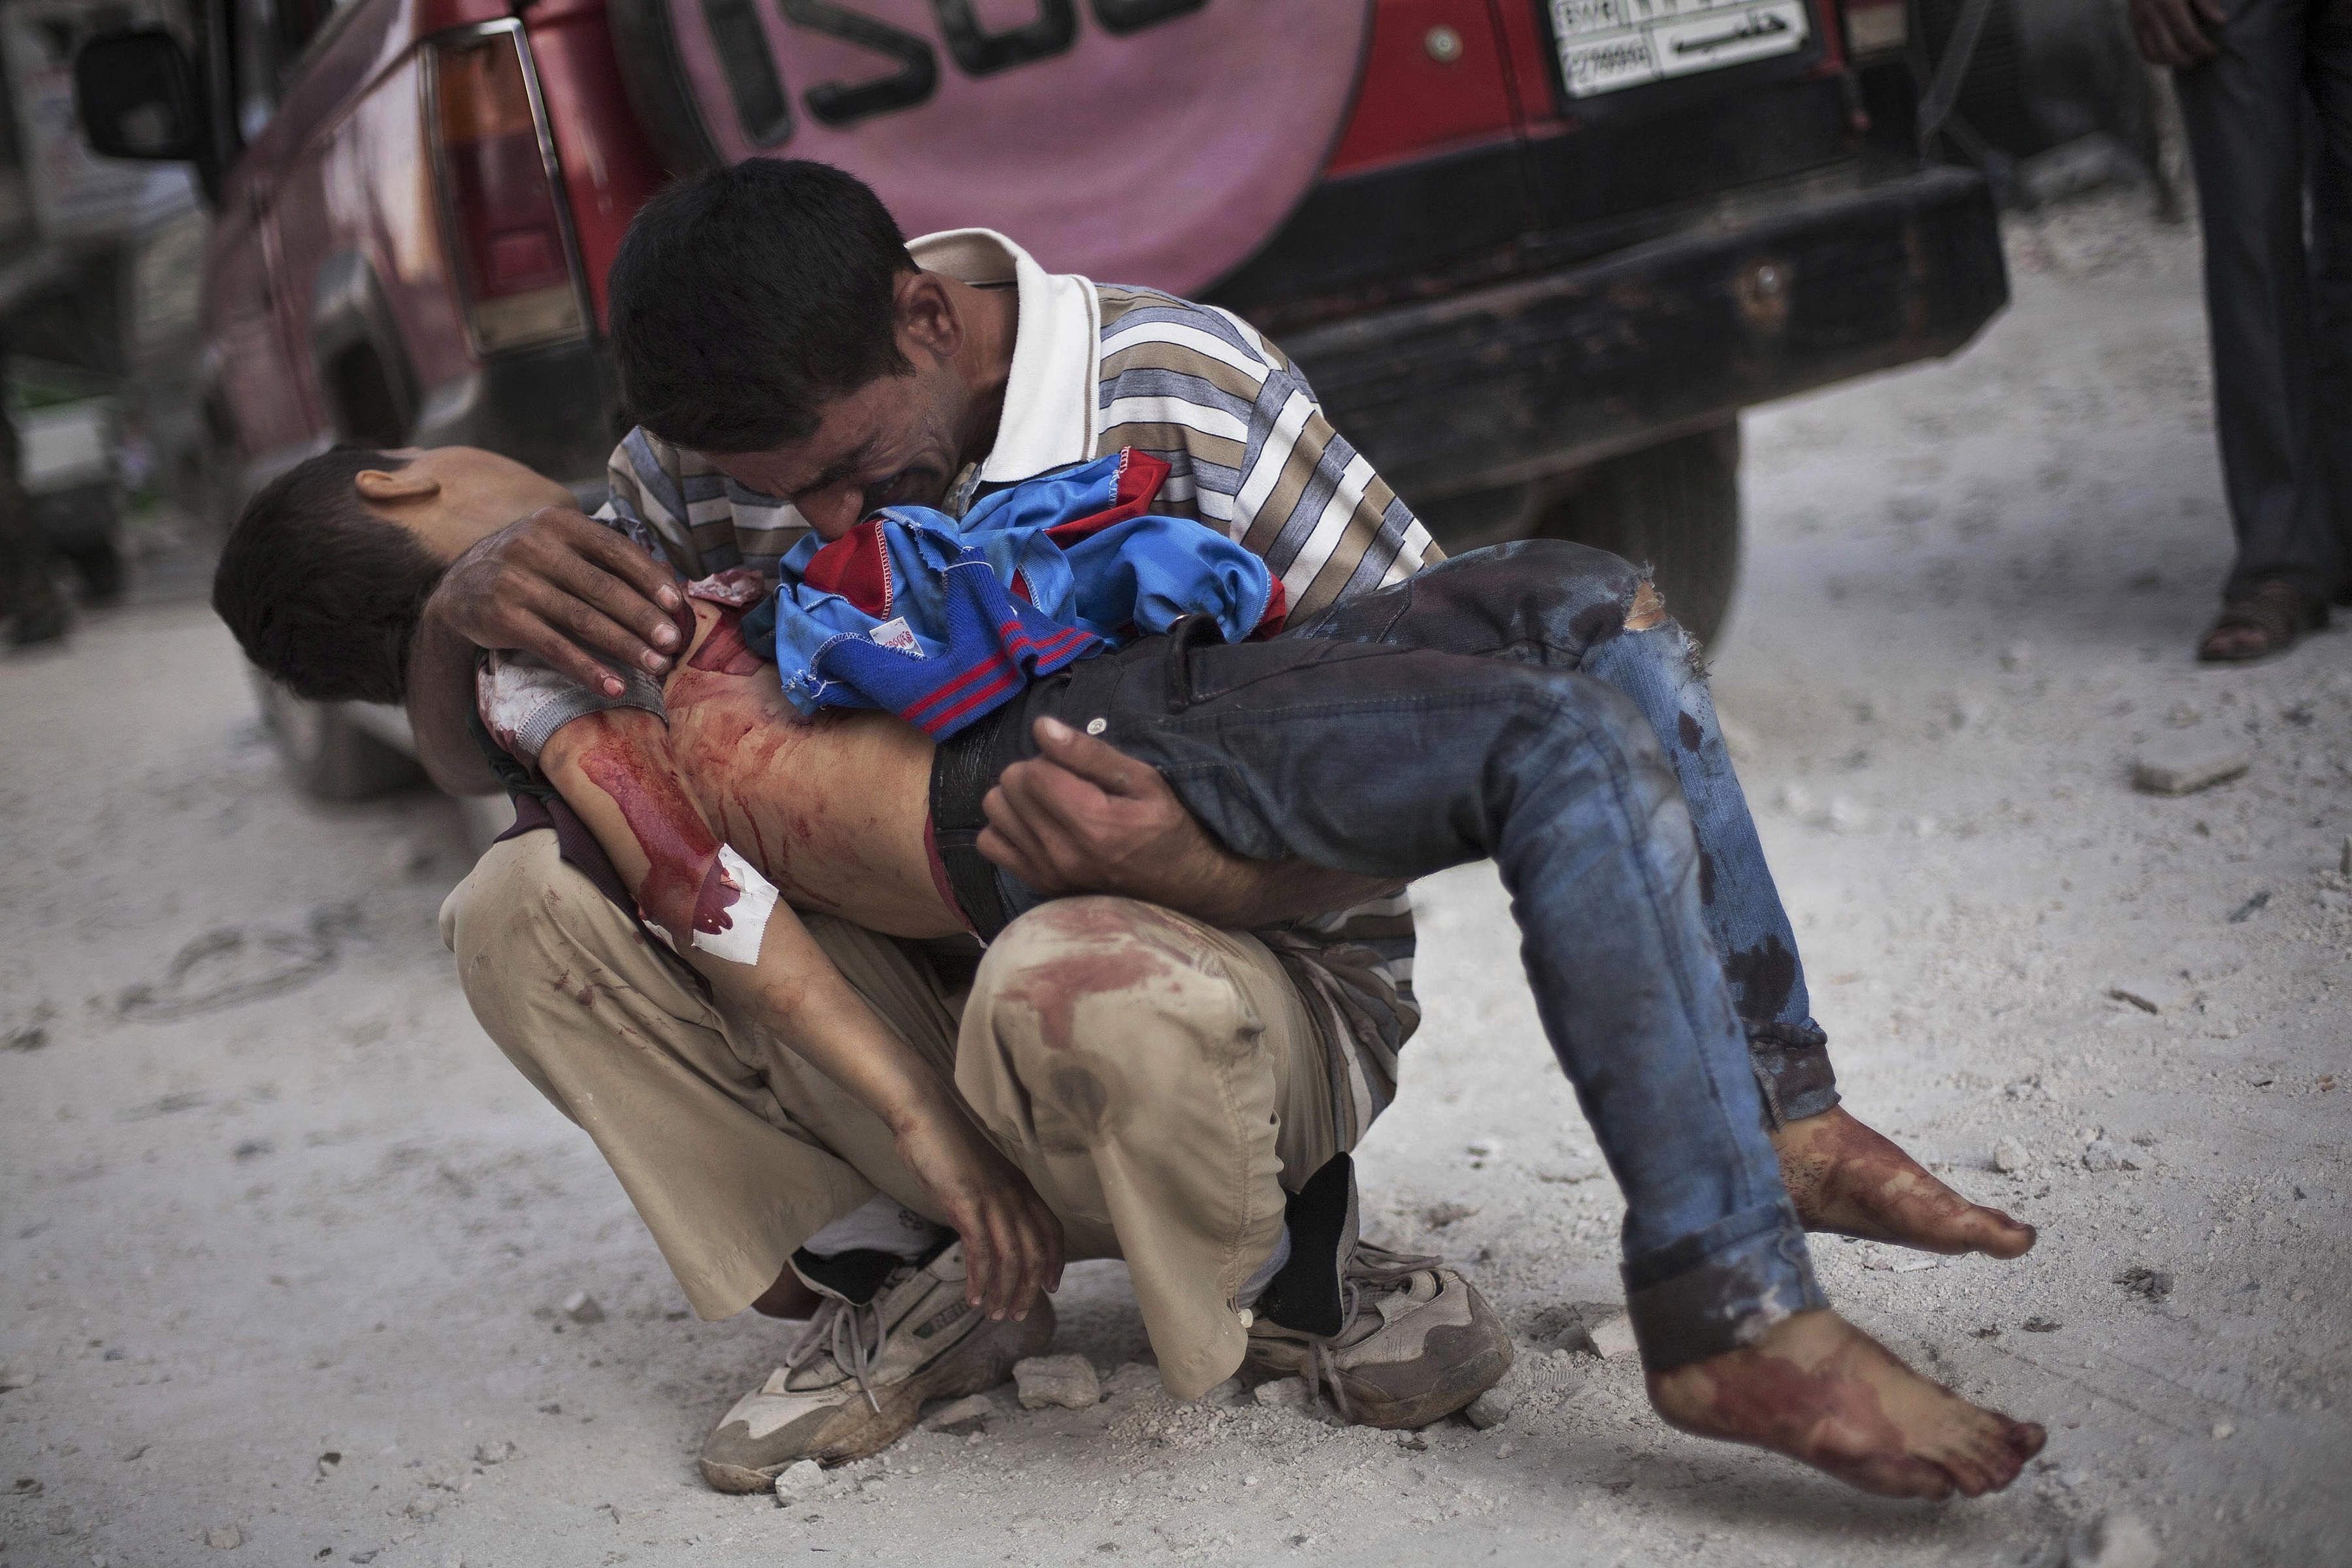 A Syrian man cries while holding the body of his son near Dar El Shifa hospital in Aleppo, Syria, Oct. 3, 2012. The boy was killed by the Syrian army. This image was one in a series of 20 by AP photographers that won the 2013 Pulitzer Prize in Breaking News Photography. (AP Photo/Manu Brabo)